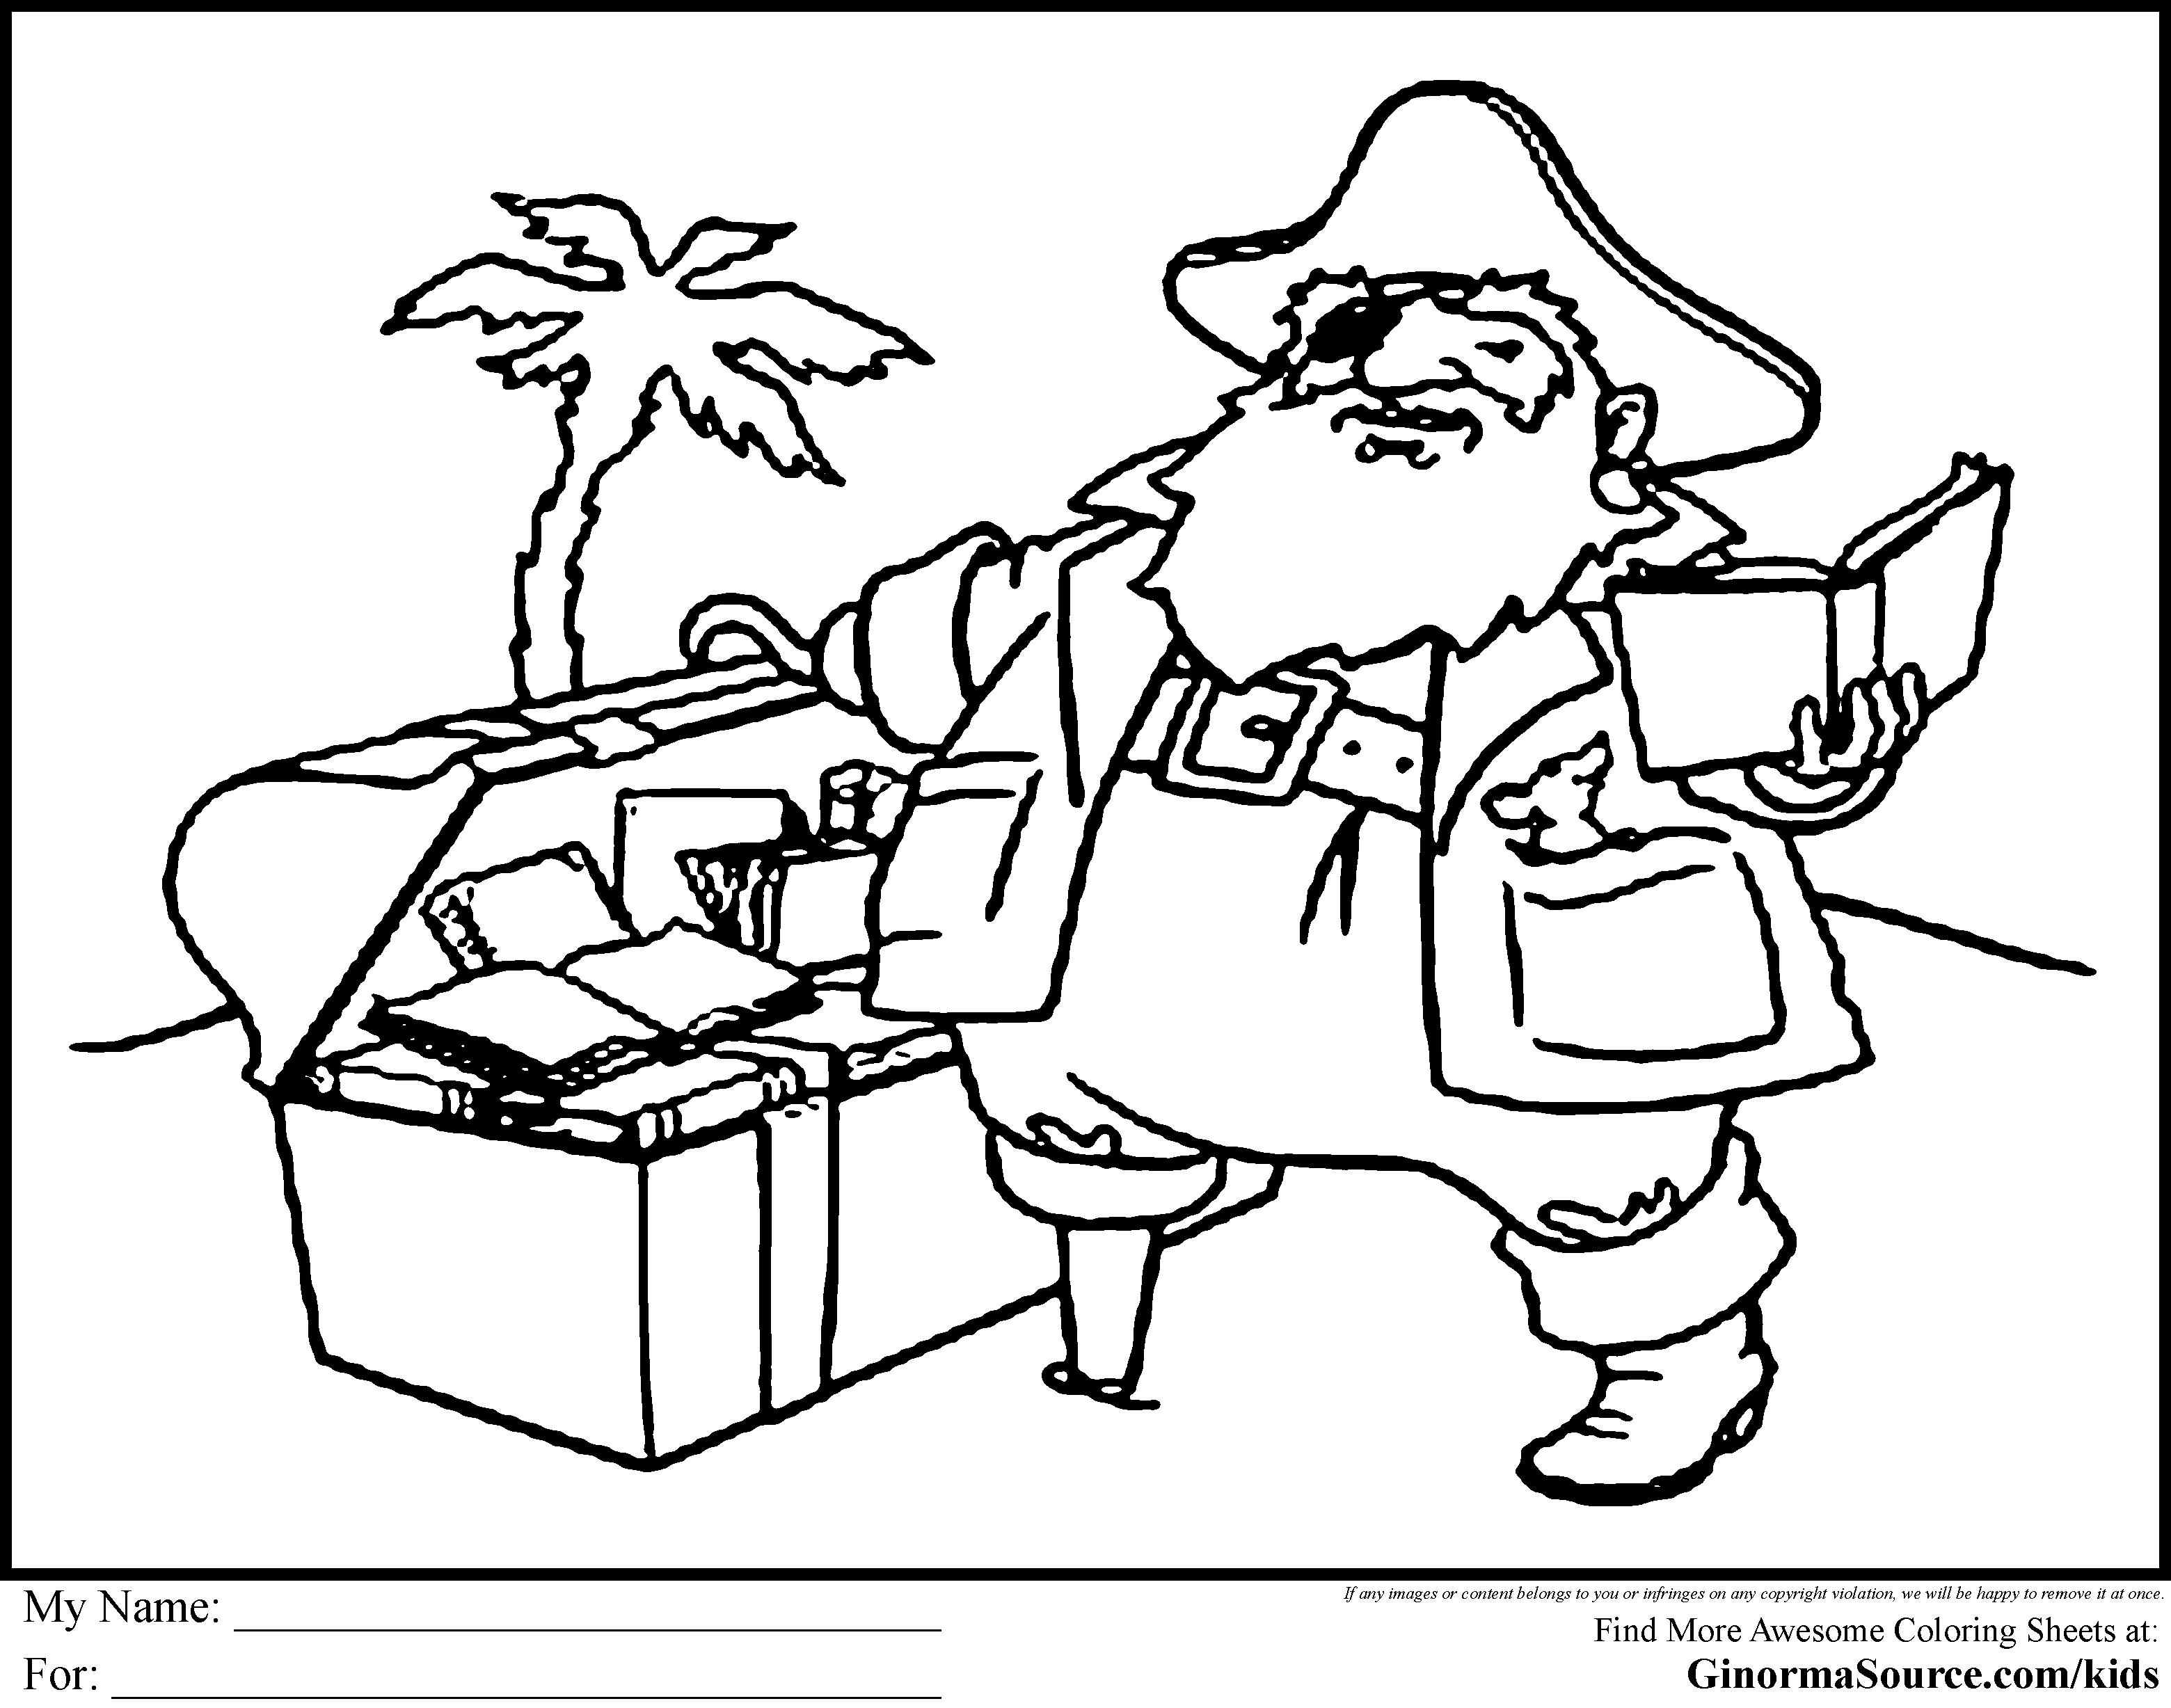 Free Coloring Pages Of Pirate Color Page 12185, - Bestofcoloring.com